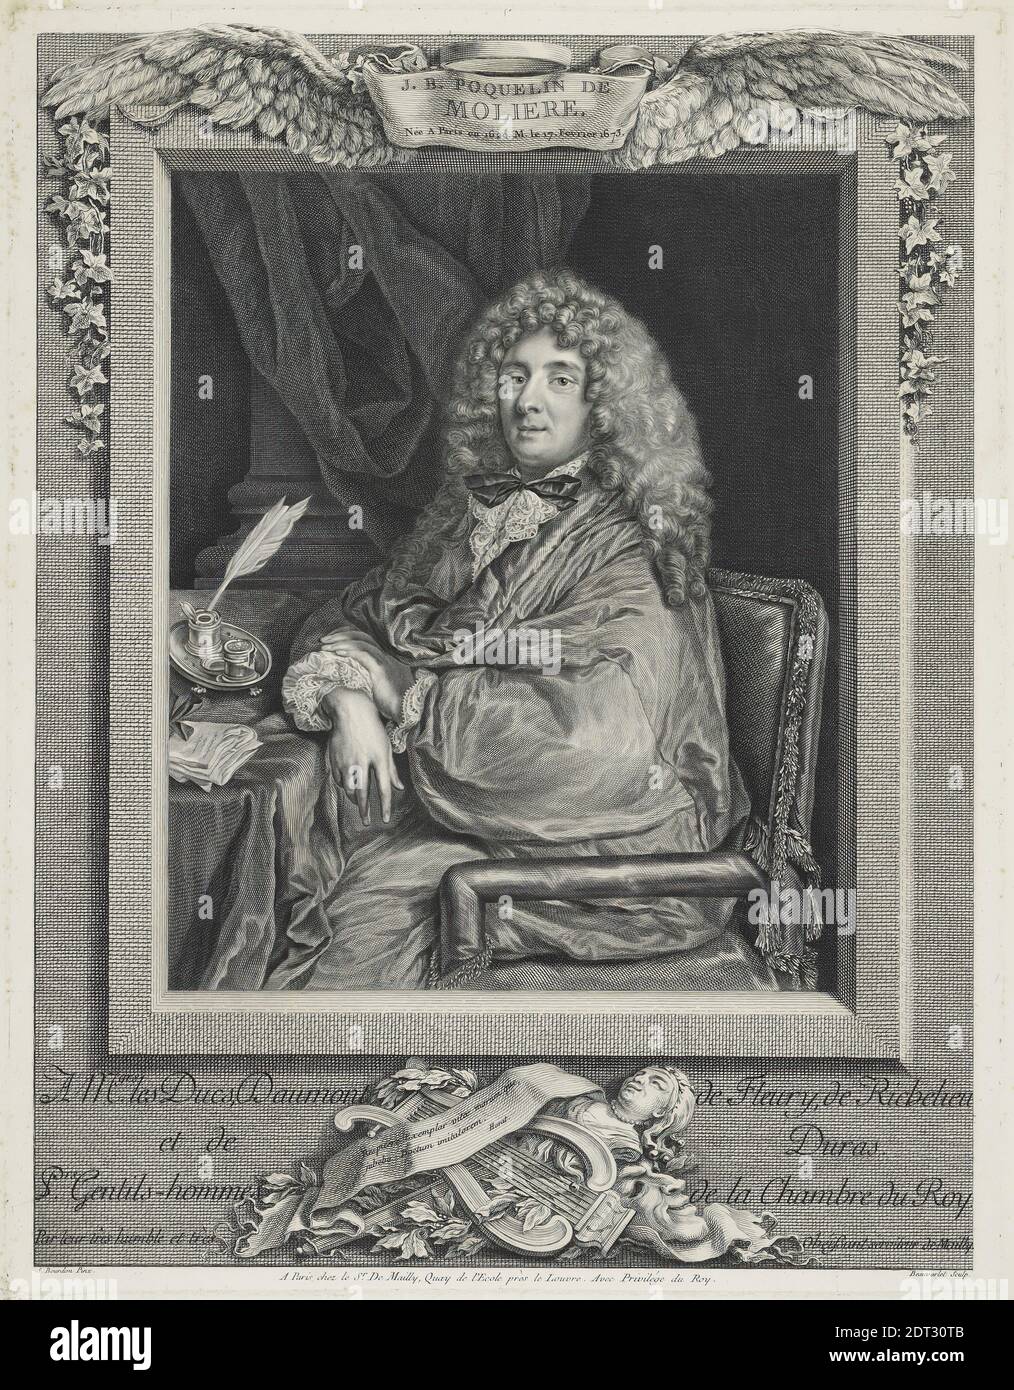 Artist: Jacques Firmin Beauvarlet, French, 1731–1797, After: Sébastien Bourdon, French, 1616–1671, Portrait of Molière, Engraving, image: 45.7 × 35.2 cm (18 × 13 7/8 in.), French, 18th century, Works on Paper - Prints Stock Photo